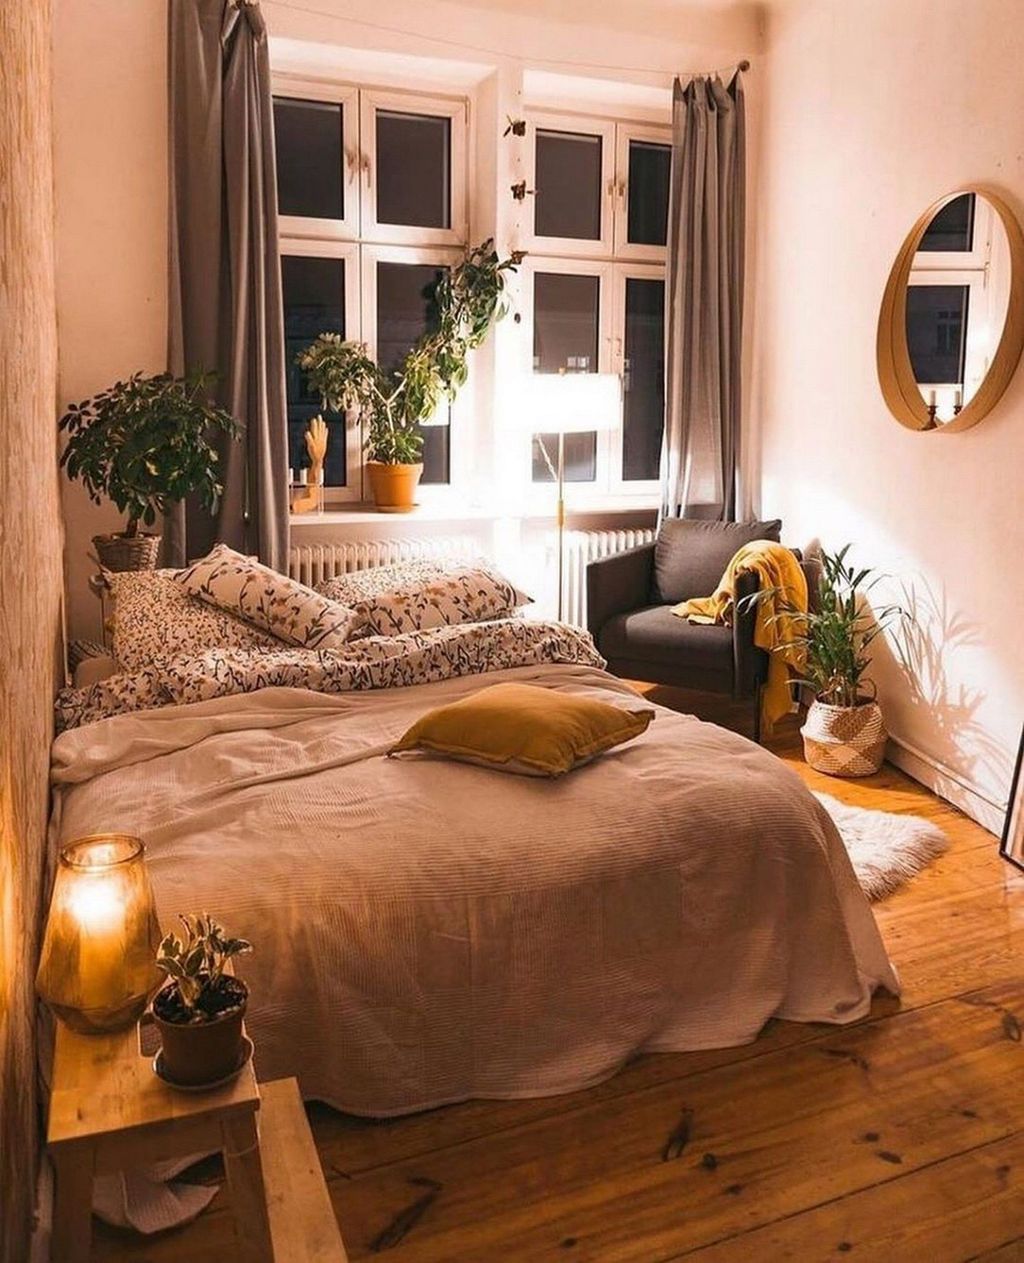 Small Bedroom Ideas: Creating A Cozy Retreat On A Budget